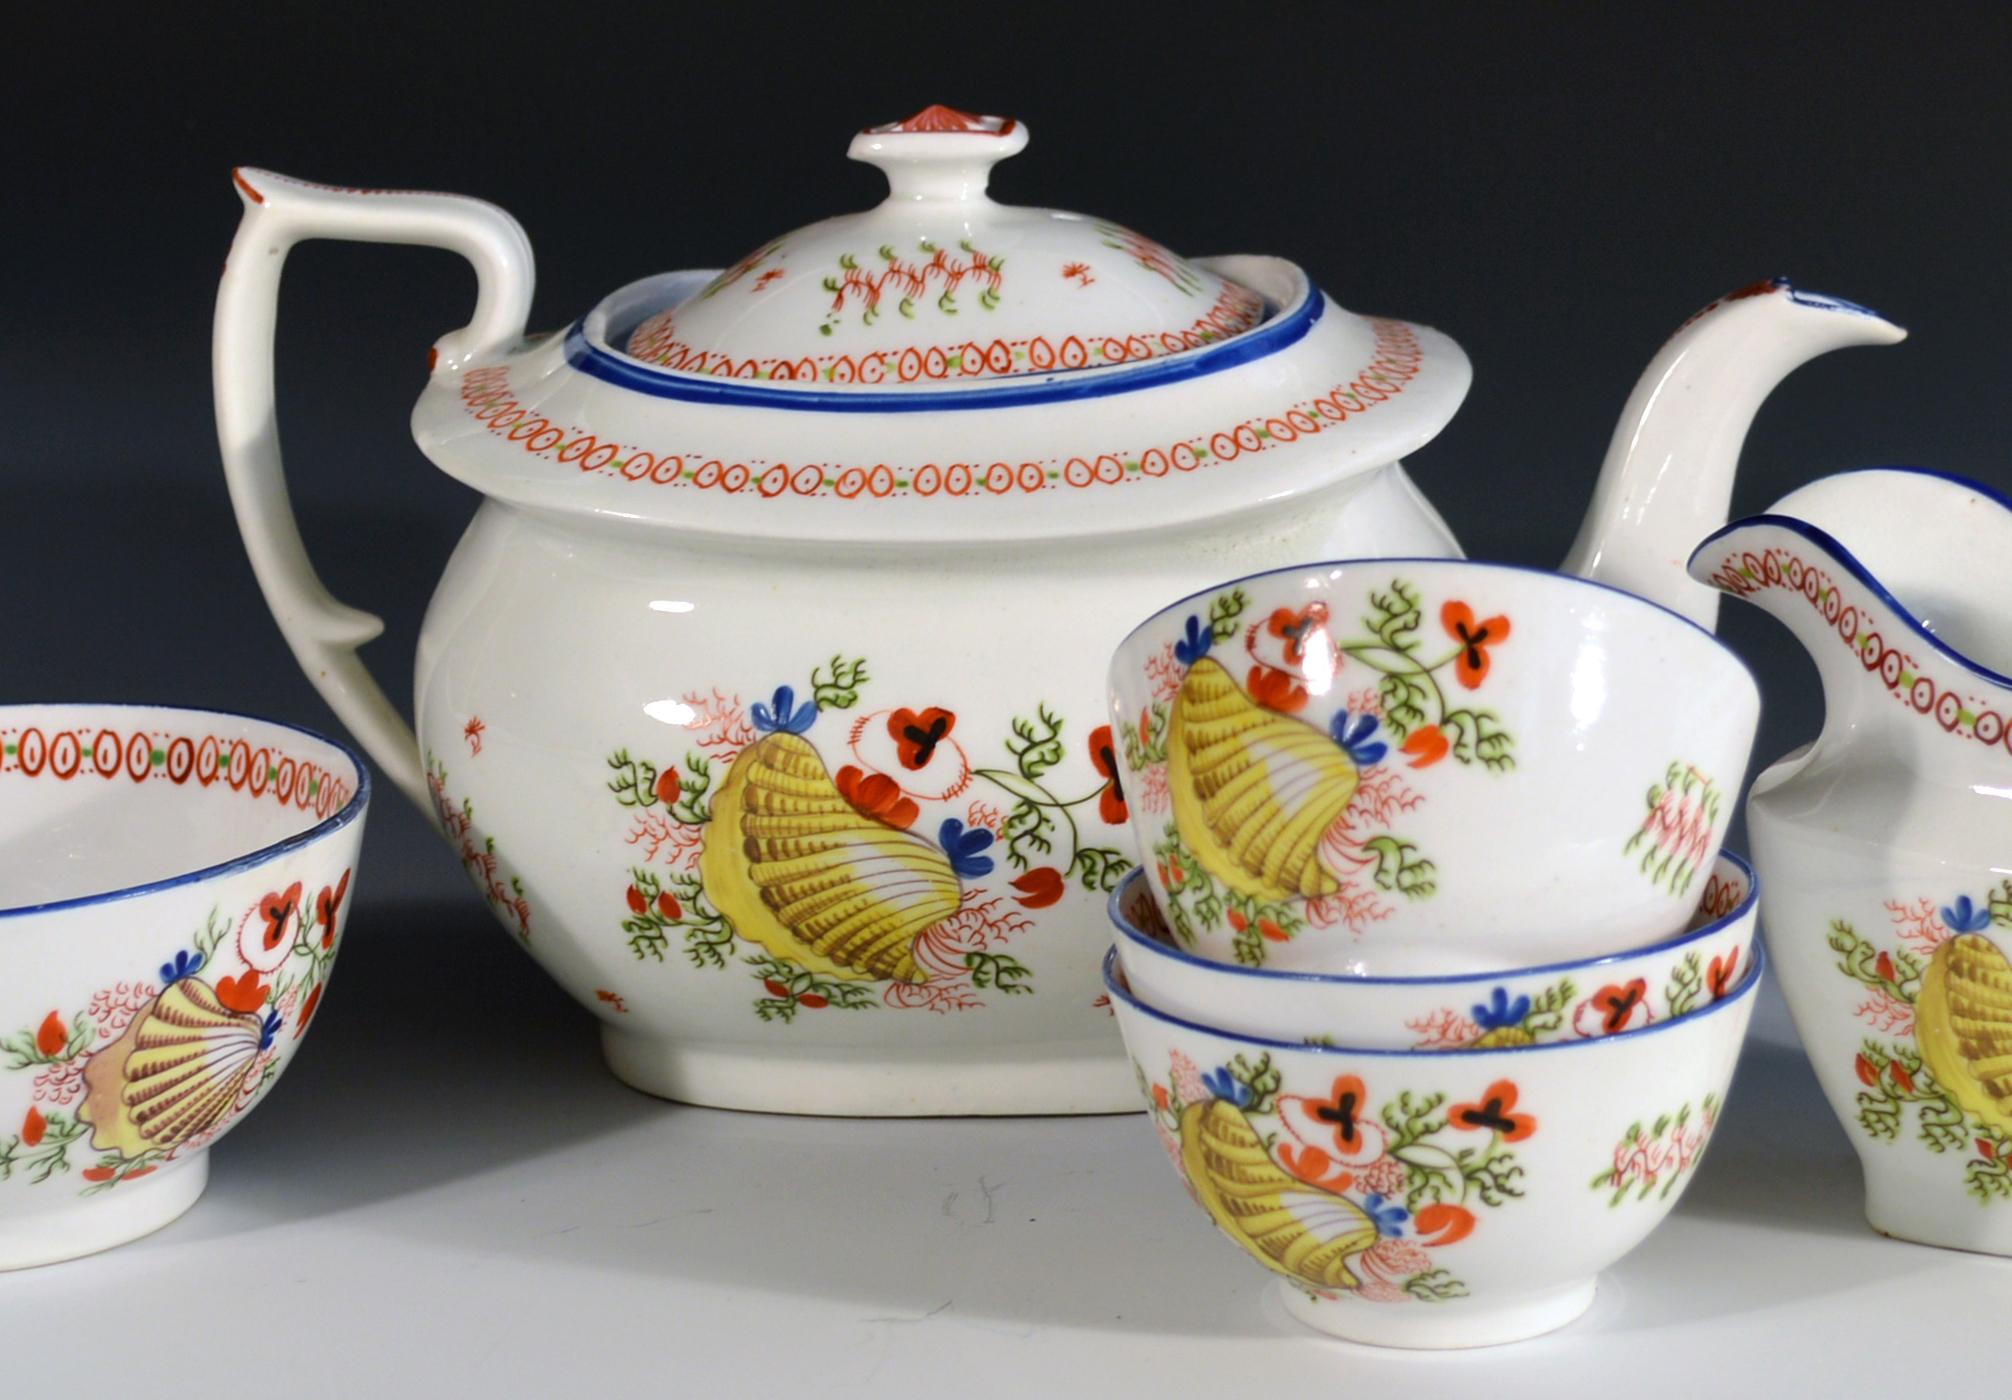 19th Century English New Hall Porcelain Part Tea Service with Sea Shell & Seaweed For Sale